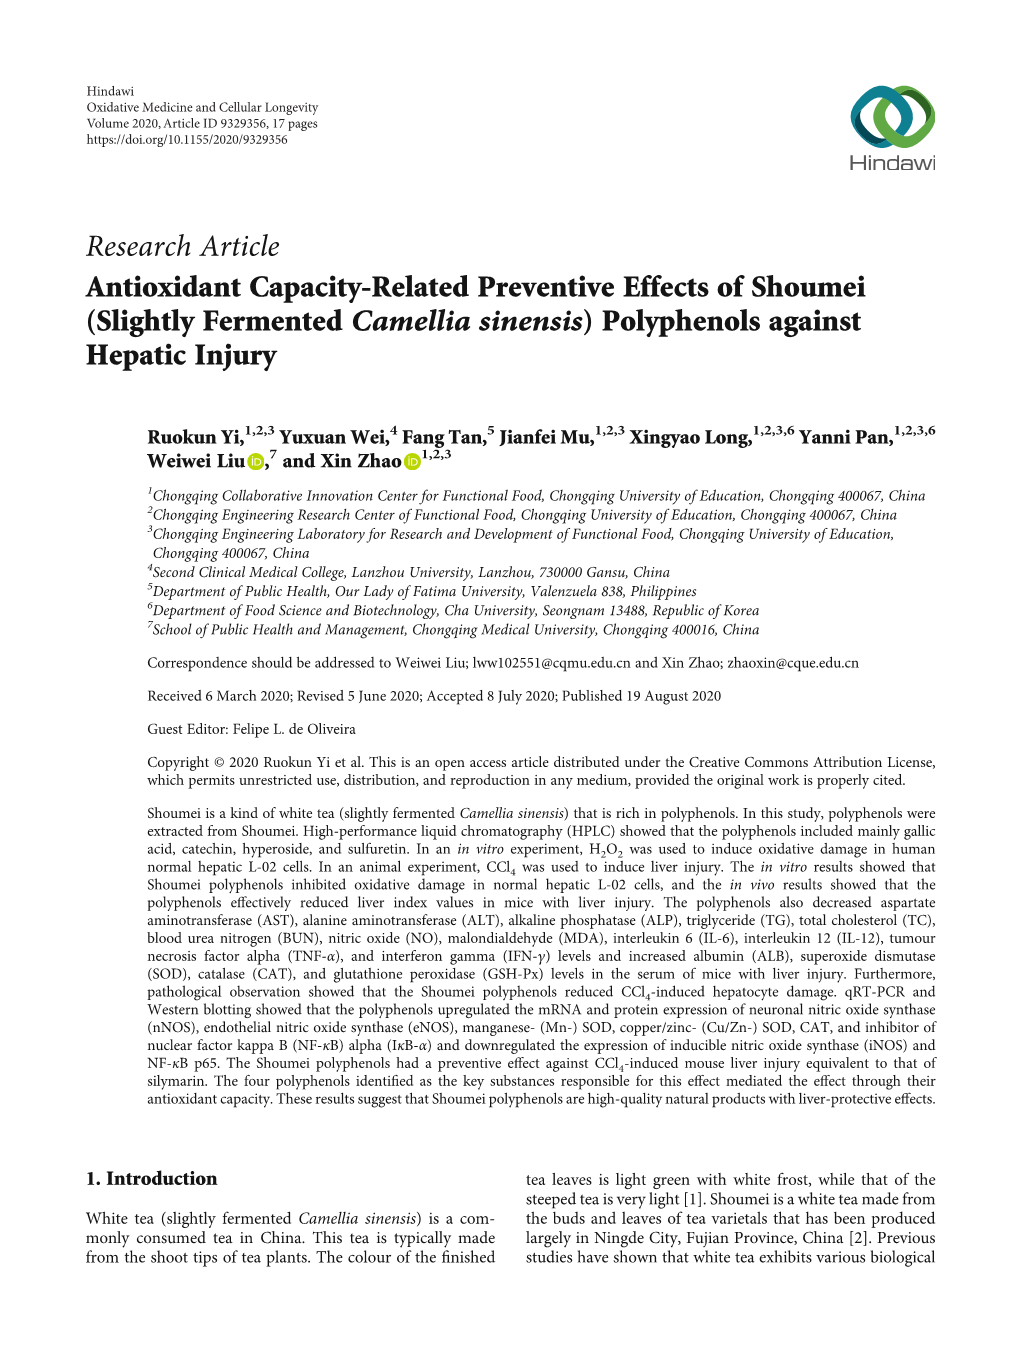 Antioxidant Capacity-Related Preventive Effects of Shoumei (Slightly Fermented Camellia Sinensis) Polyphenols Against Hepatic Injury